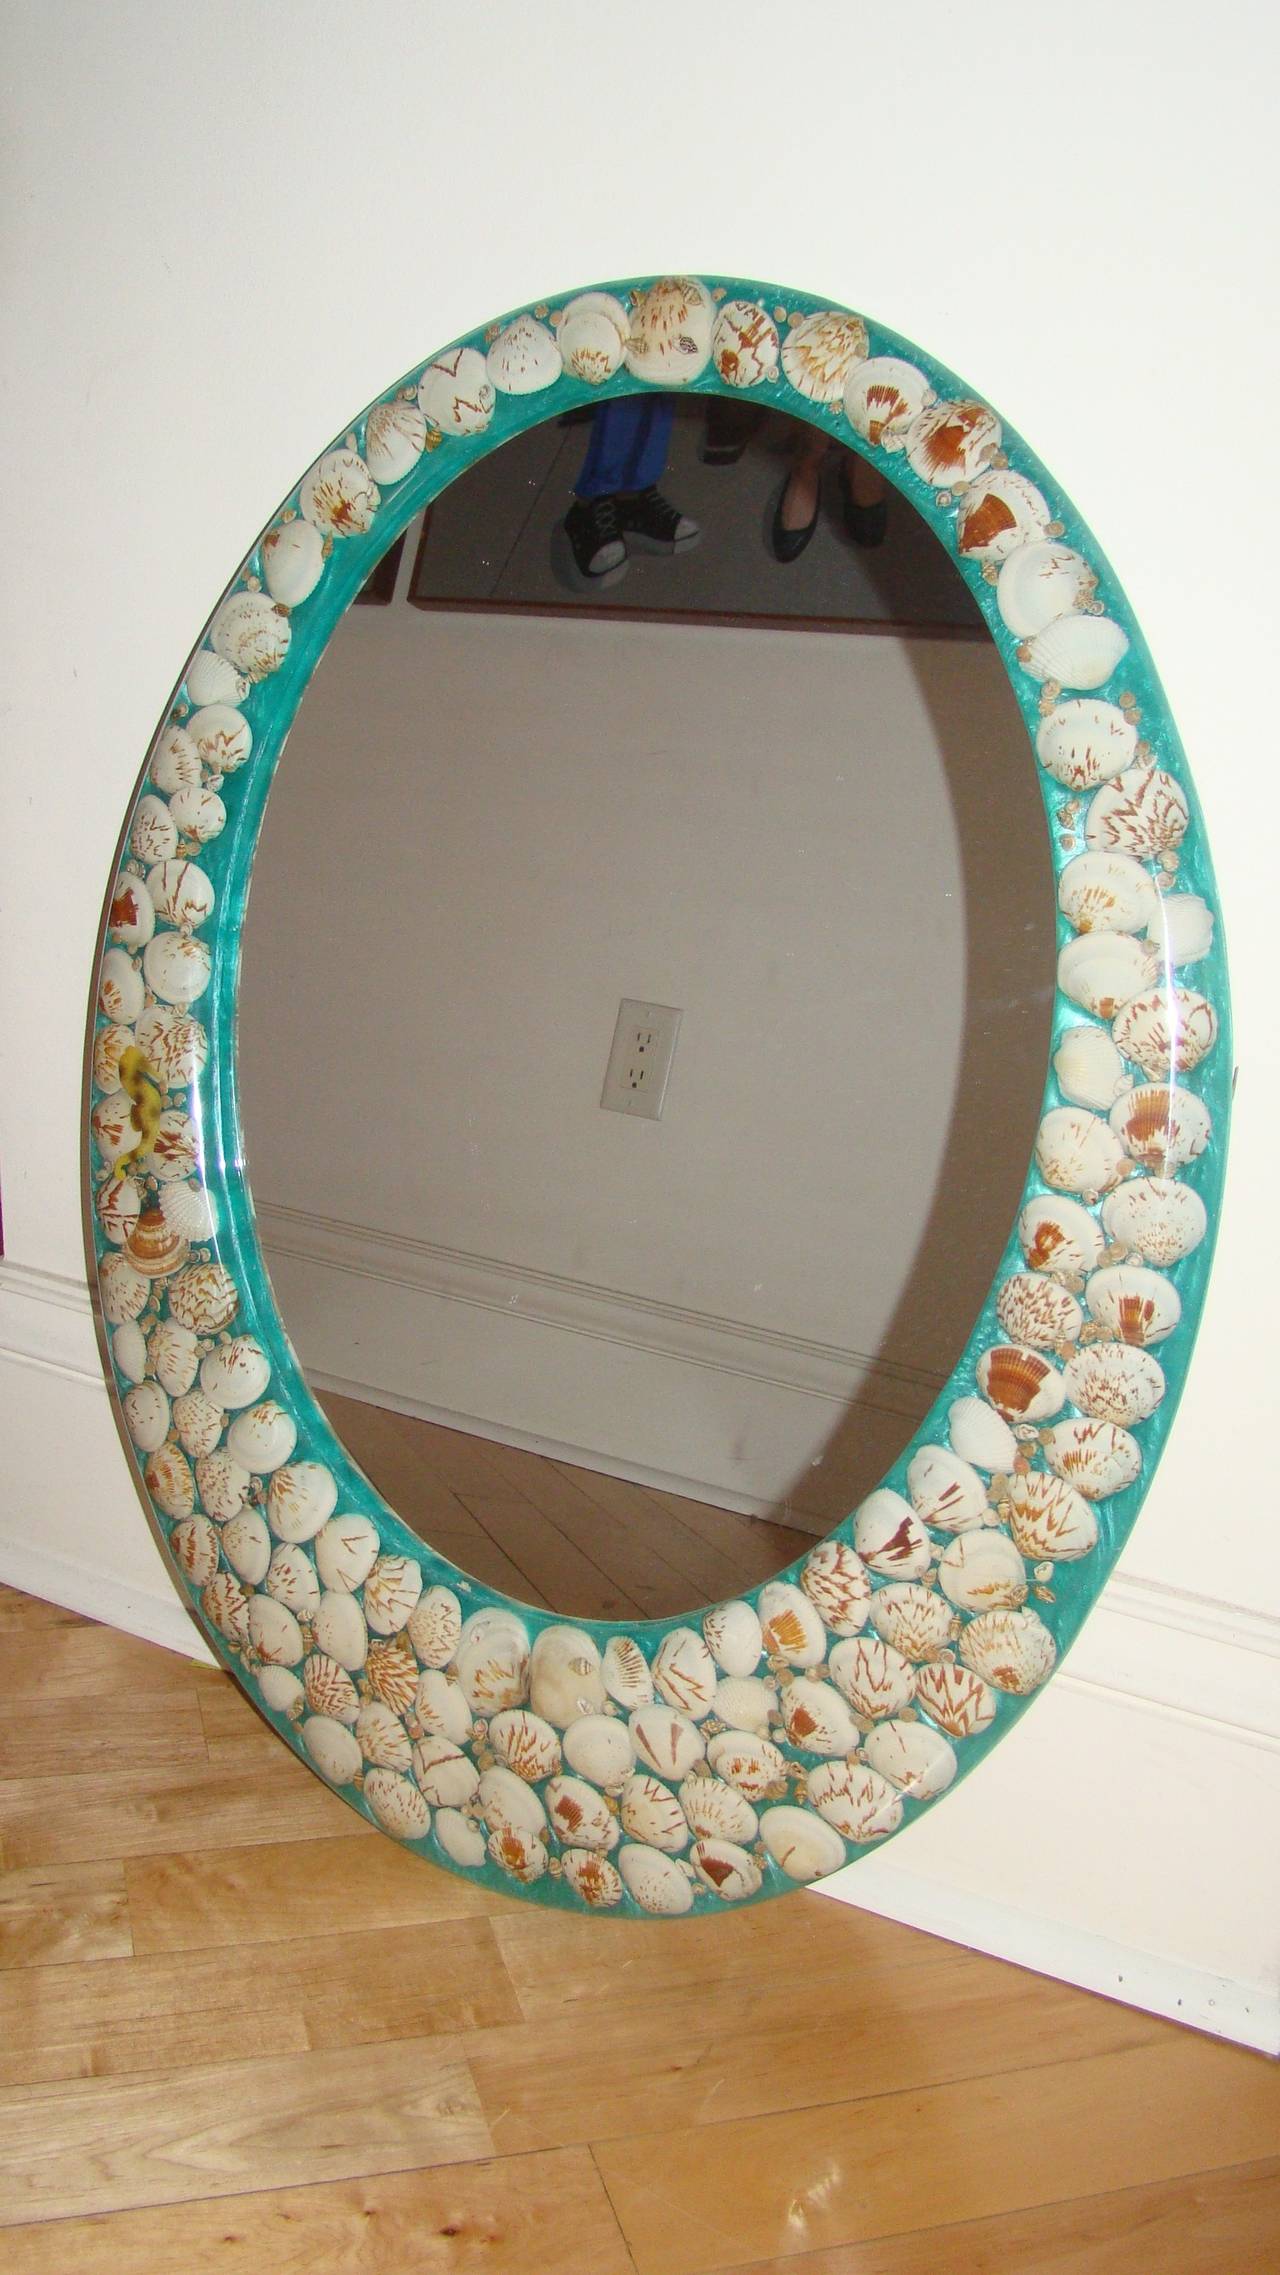 Terrific Mid-Century Lucite wall hanging mirror. This beautiful design is comprised of various sea shells internally imbedded in the Lucite with aqua color background. Truly a beautiful and unique mirror.